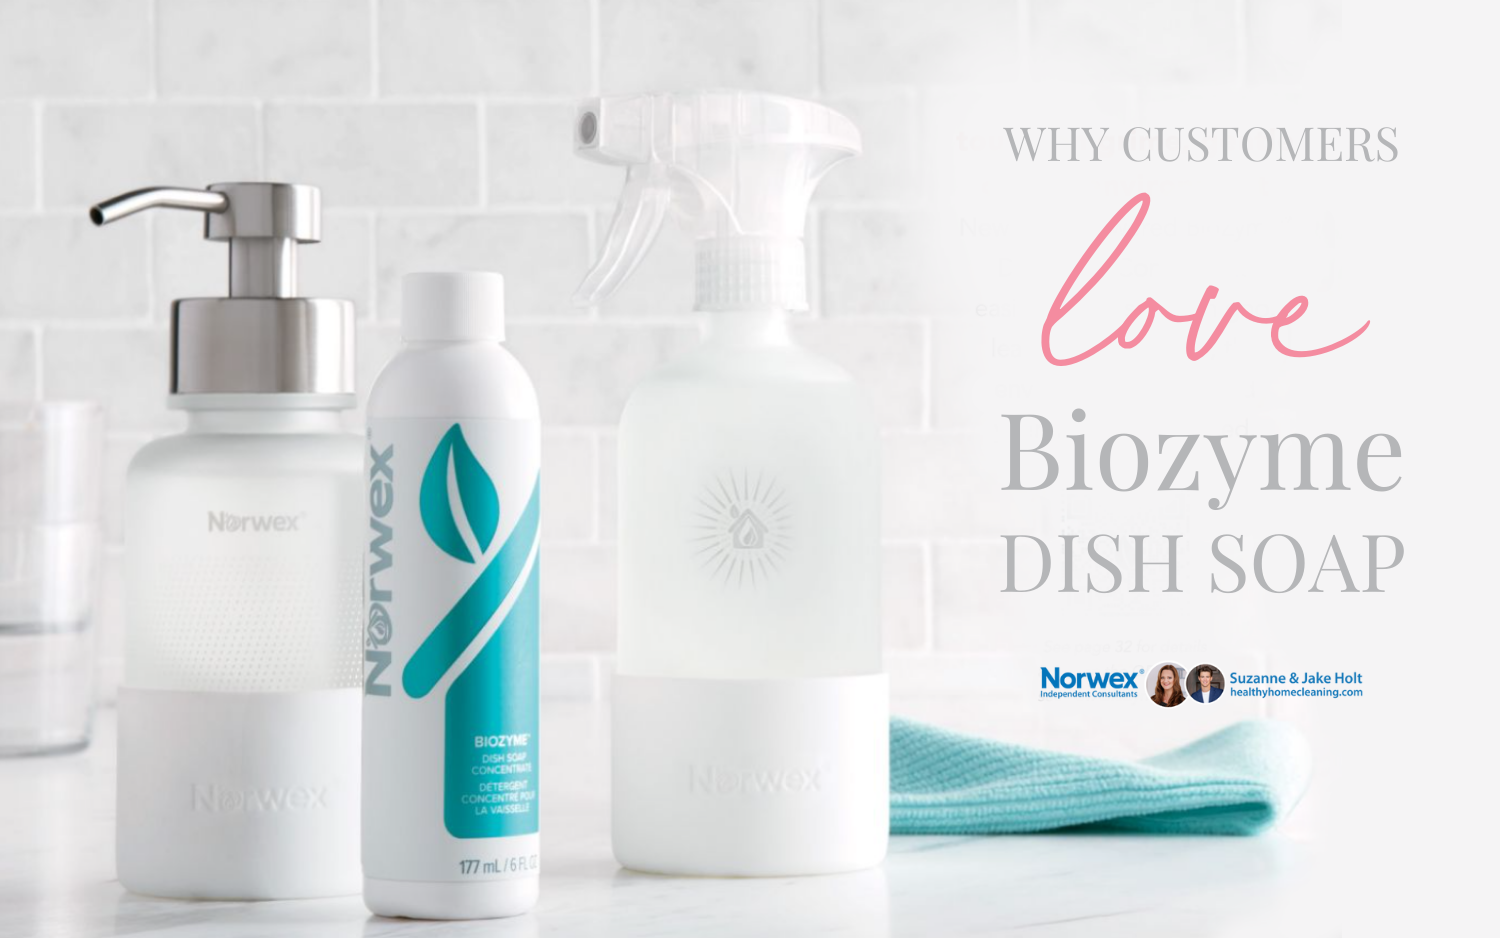 Why the Norwex Biozyme Dish Soap gets 5 Stars